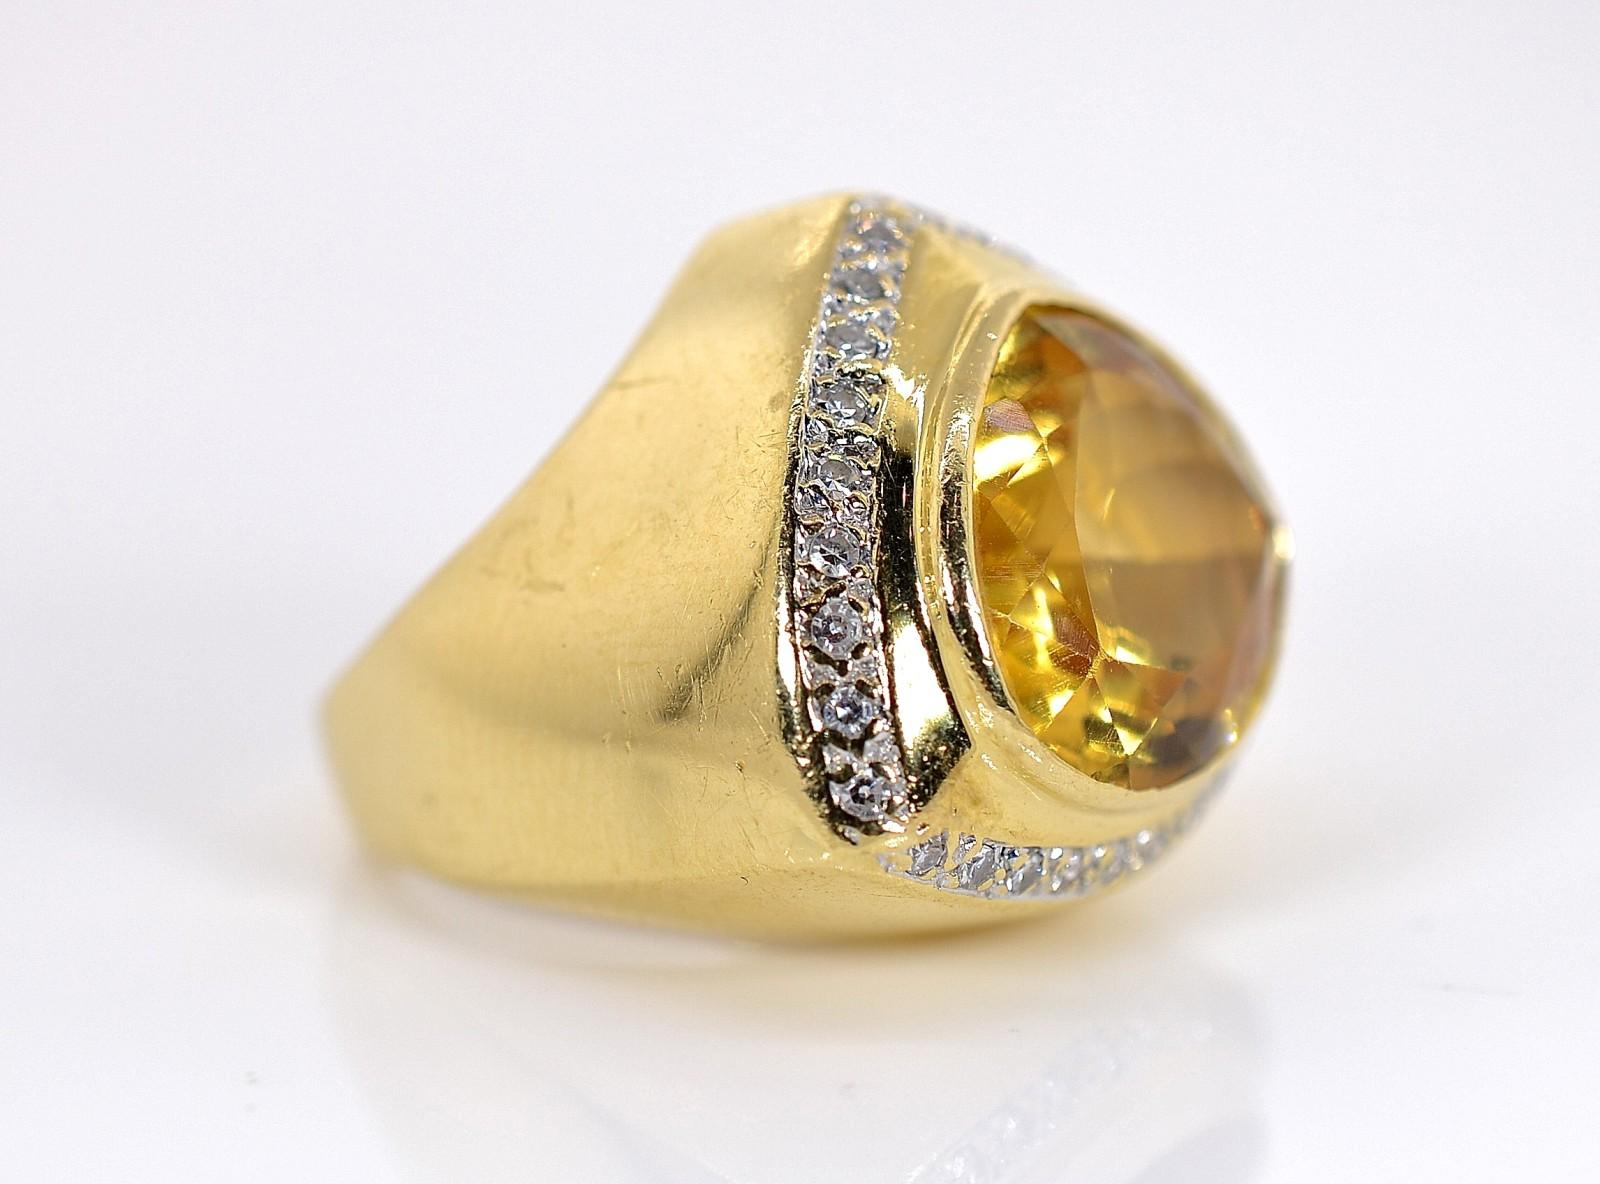 A bezel set approx. 14.00 carat yellow Citrine Quartz is the centerpiece of this distinctive ring.  The Citrine is surrounded by small sparkly Round Diamonds, all weighing approx. 0.45 carat of H/I color - VS clarity.   The bow triangle design of